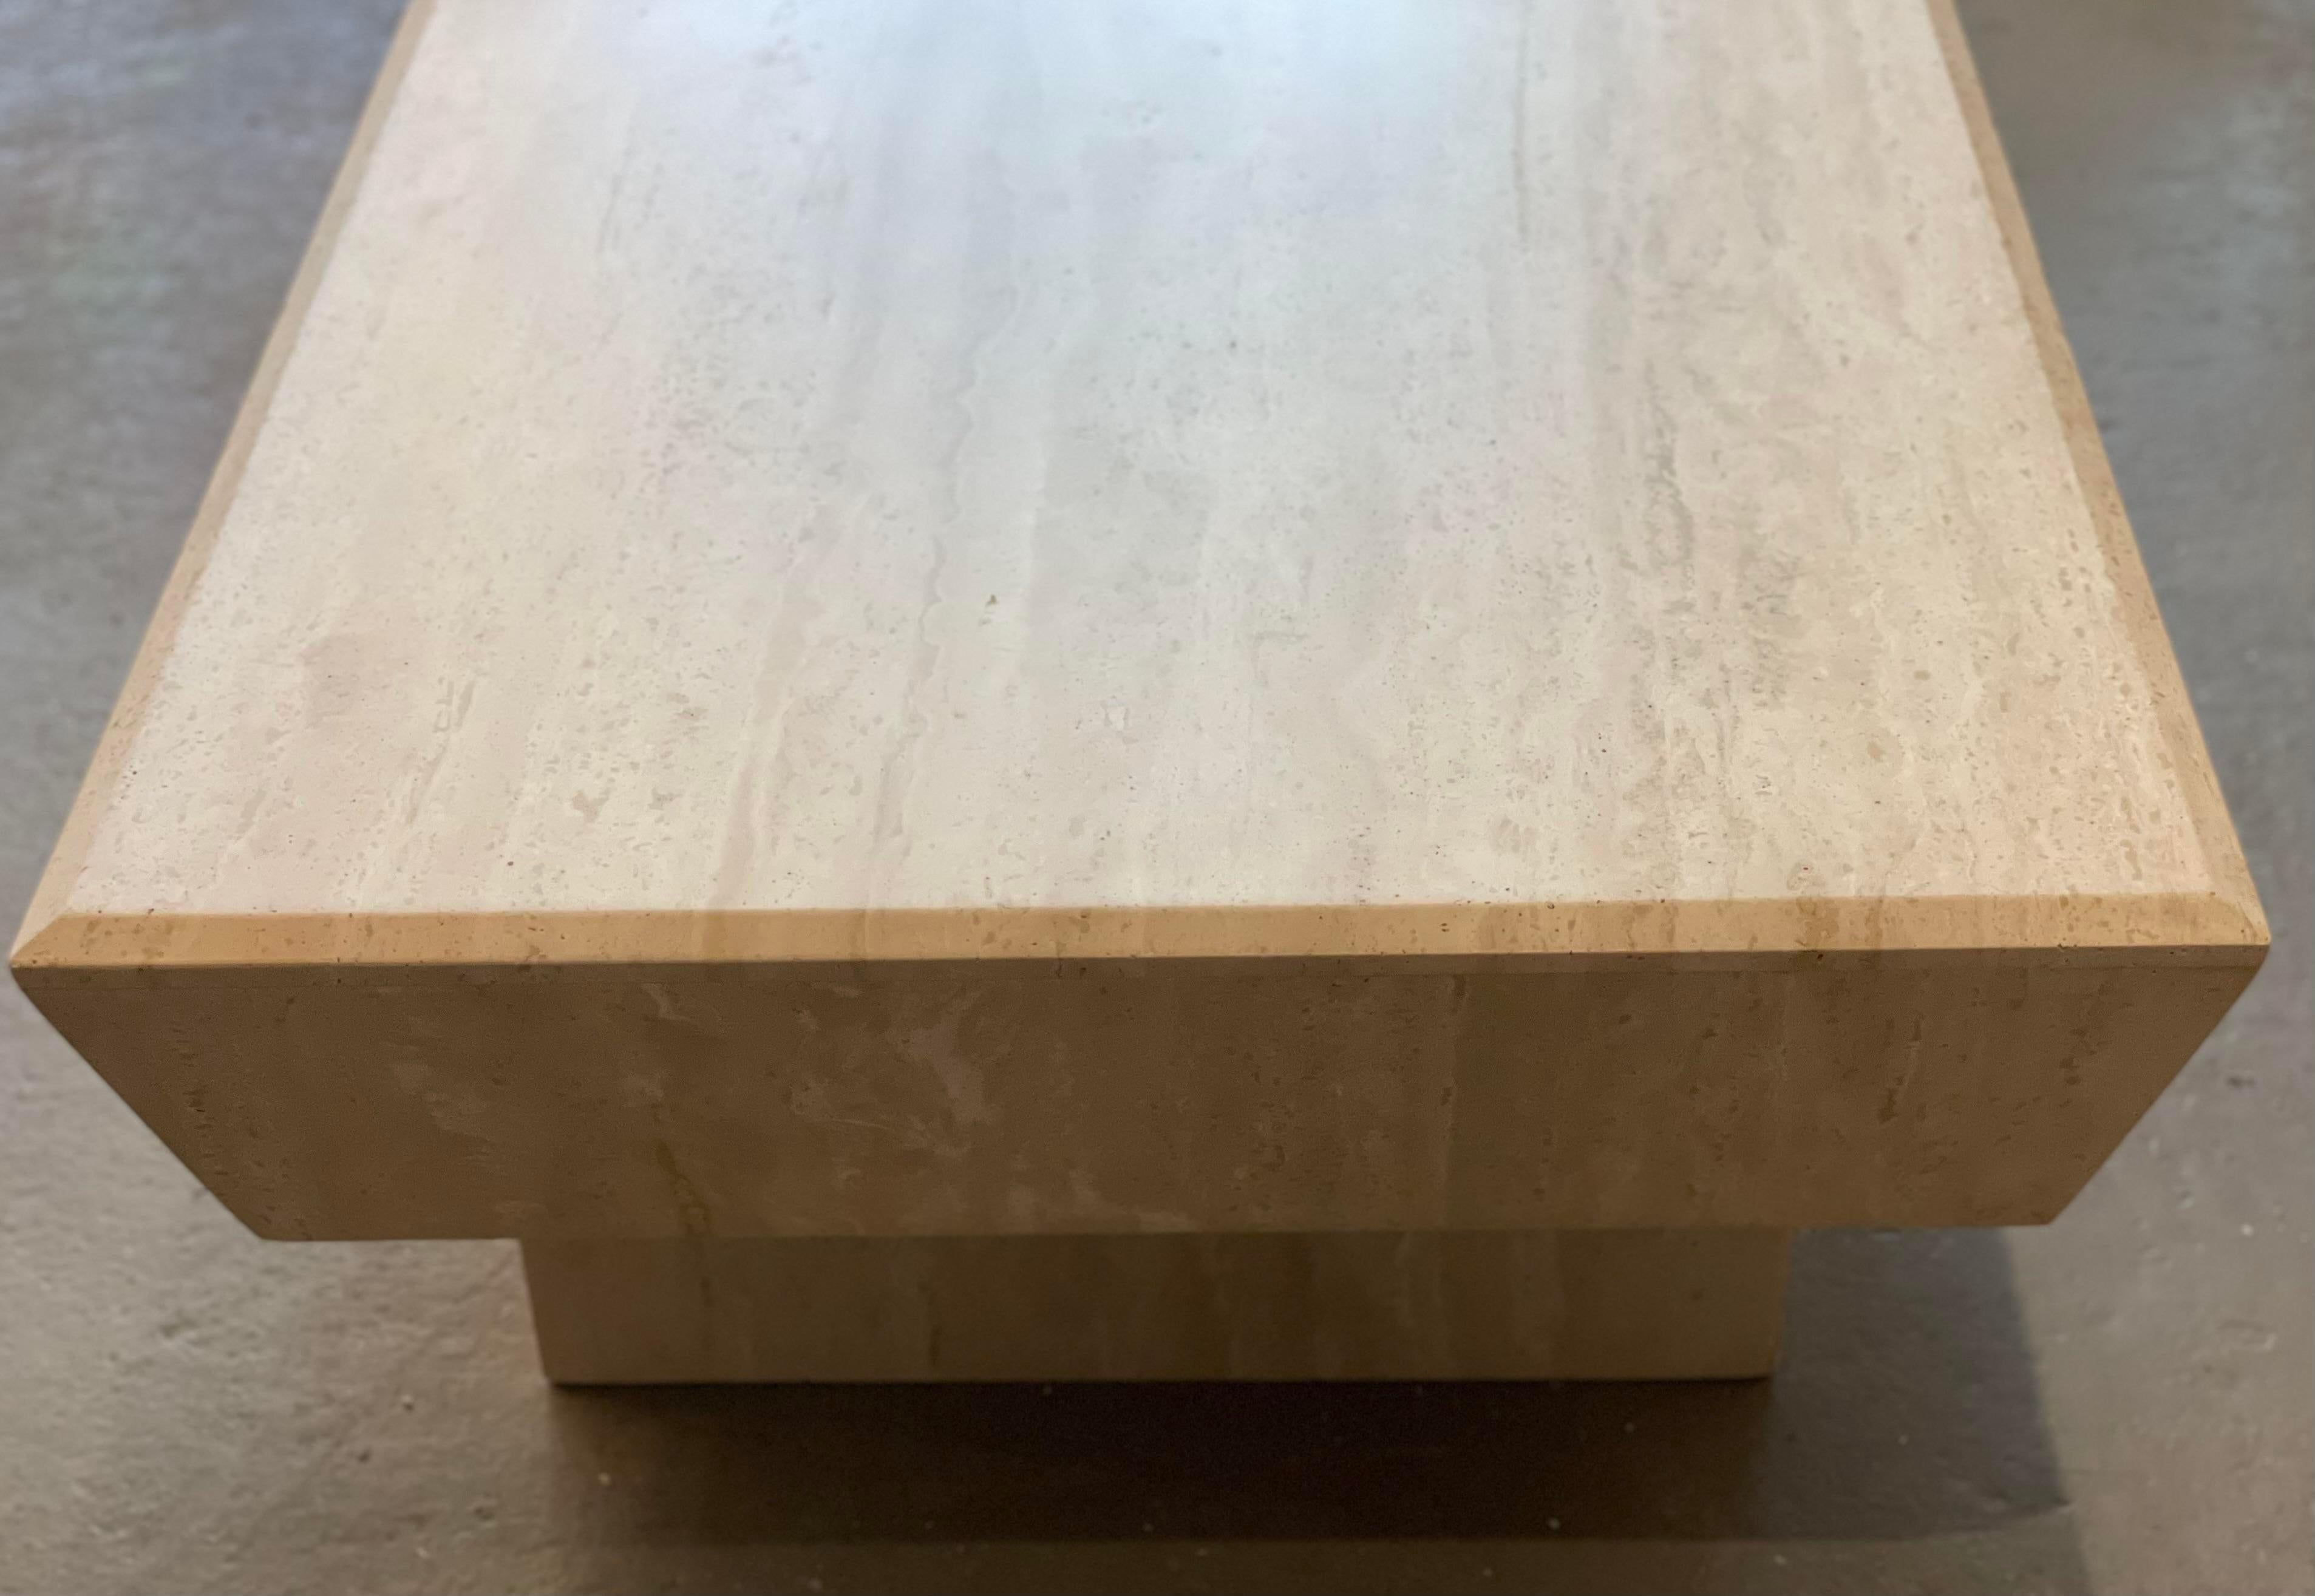 1980s Travertine Postmodern Vintage Coffee Table with Angled Edge For Sale 3